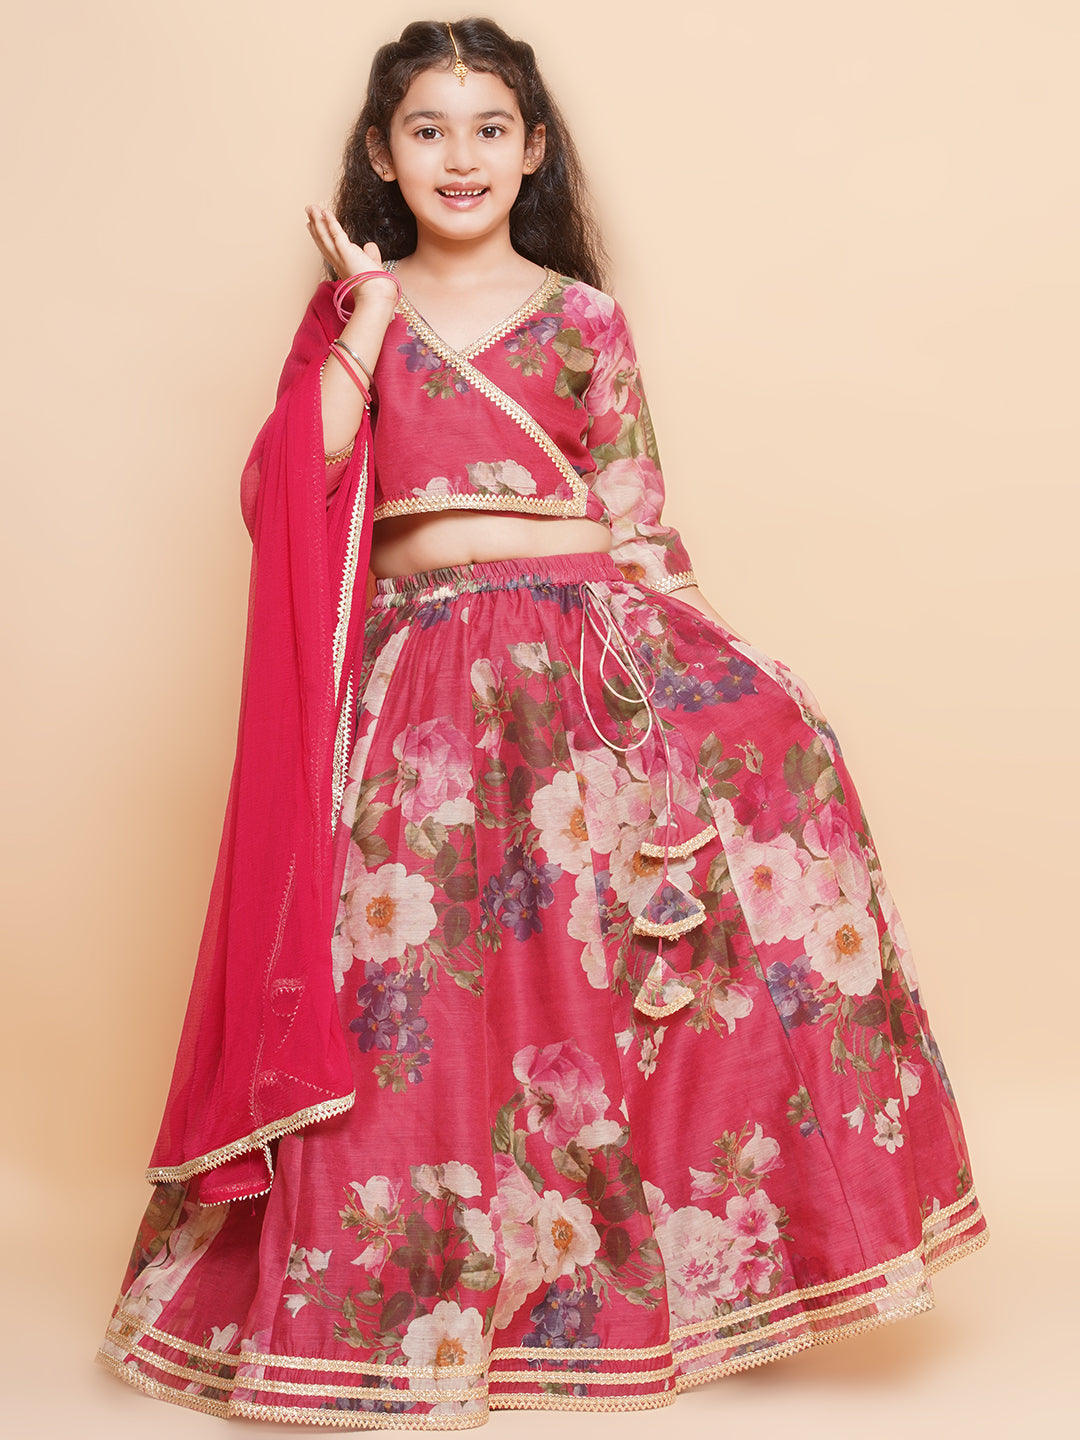 Girls Maroon Floral Printed Ready to Wear Lehenga & Blouse With Dupatta